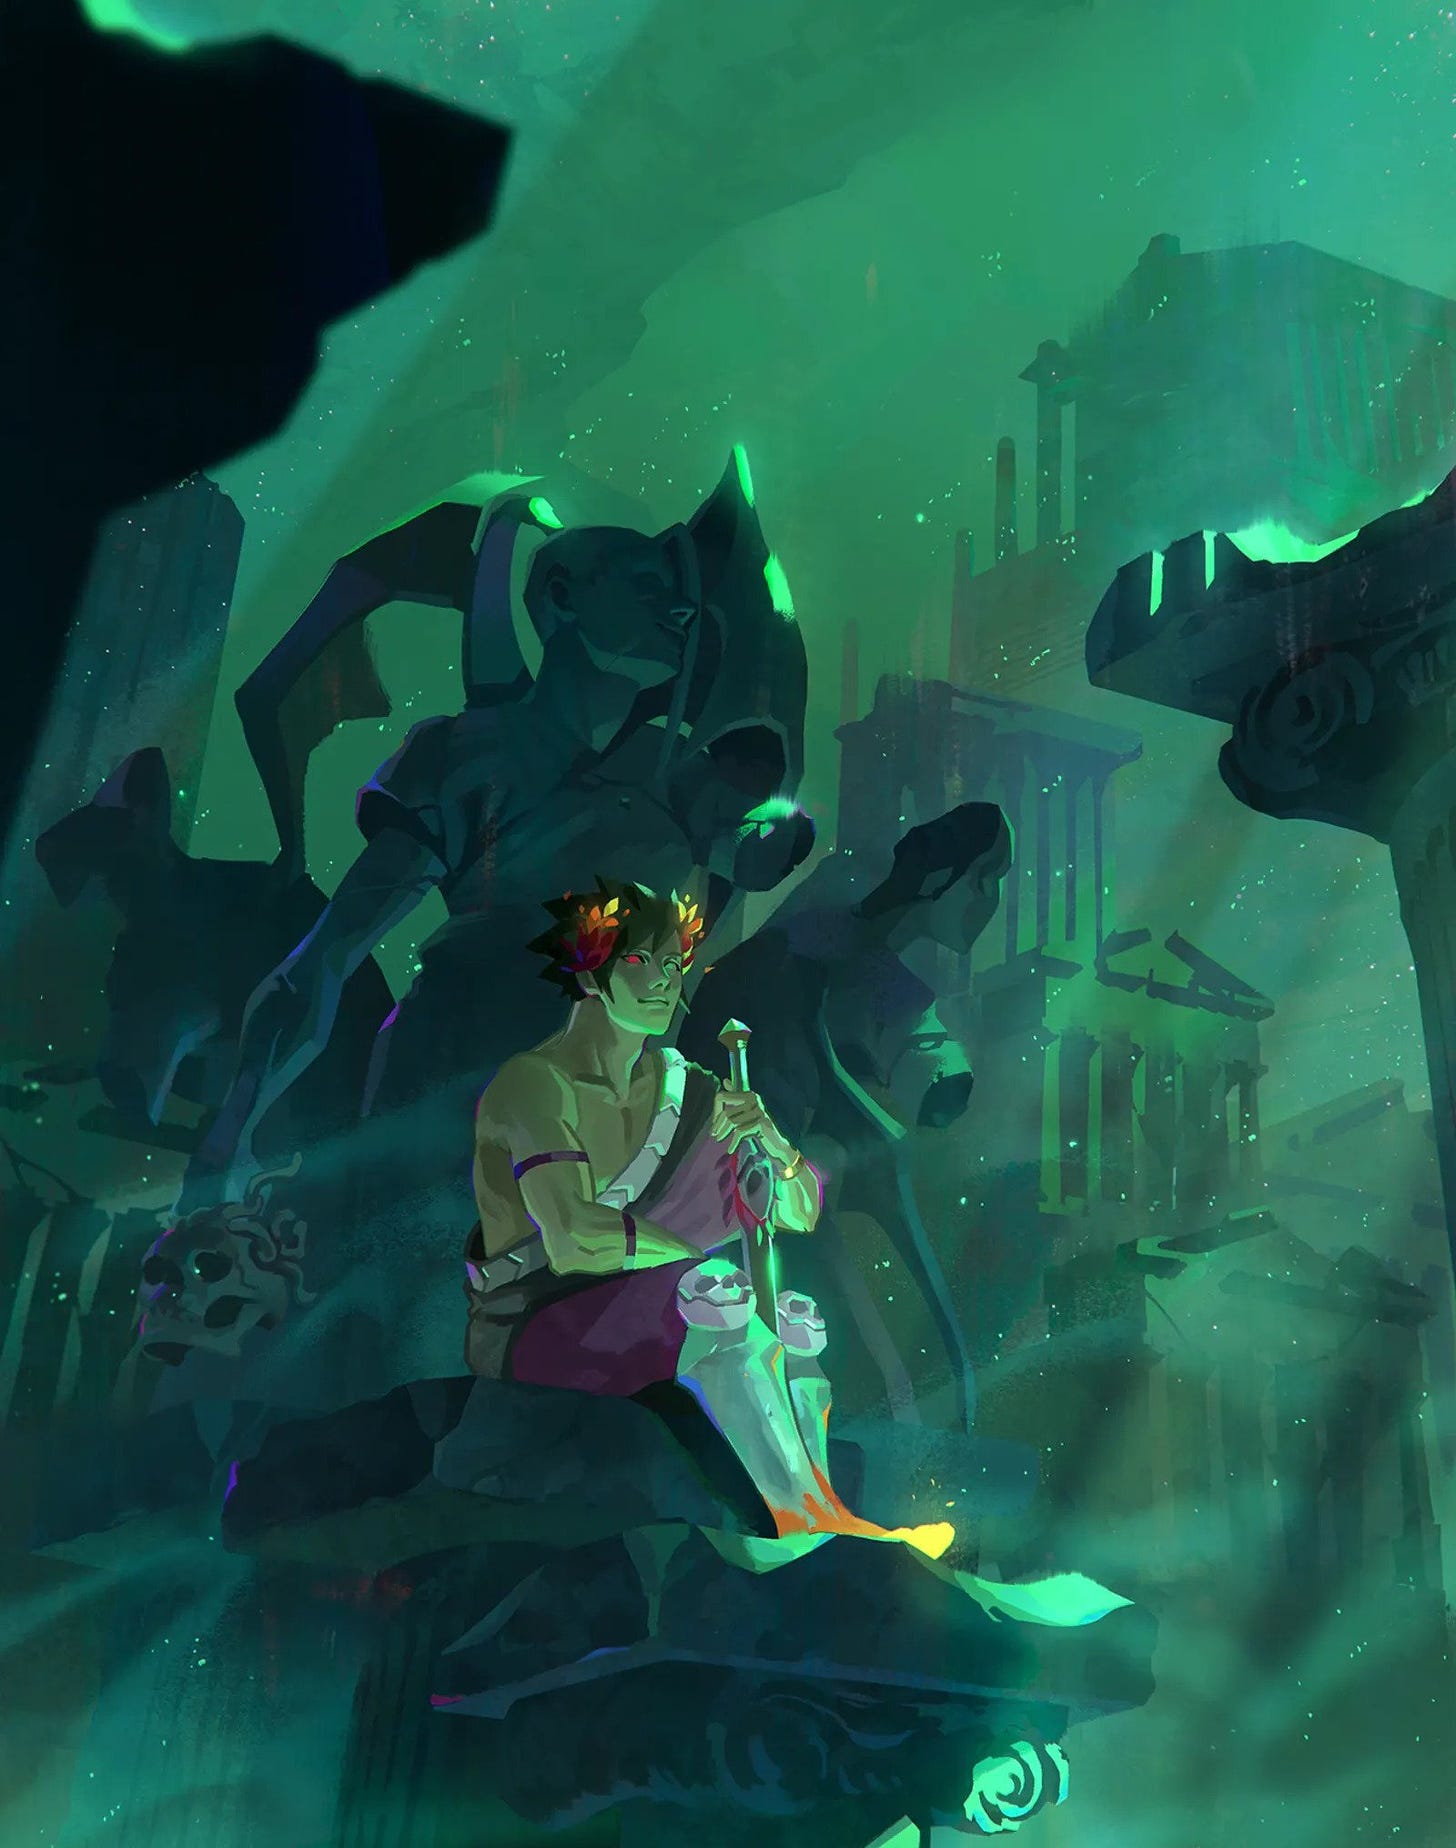 More fantastic art from the game developers alone. Source: Supergiant Games